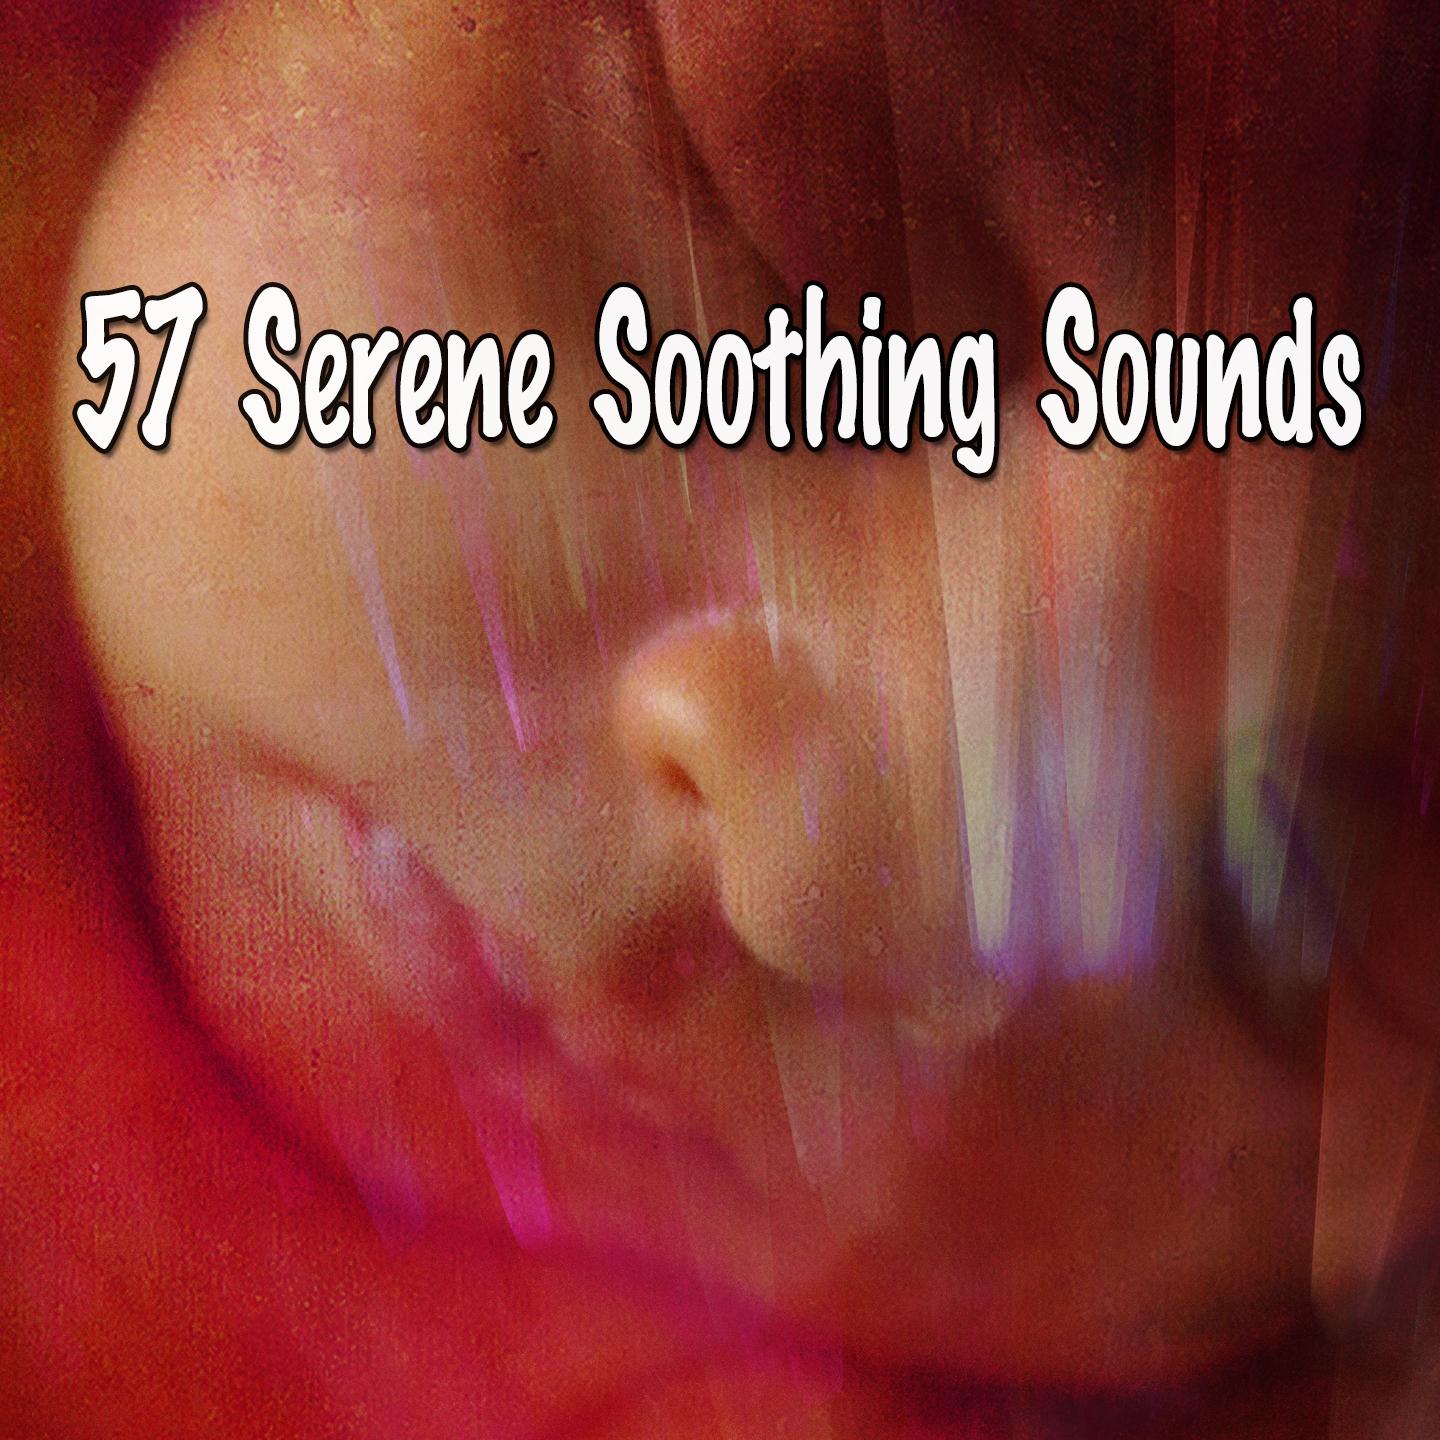 57 Serene Soothing Sounds